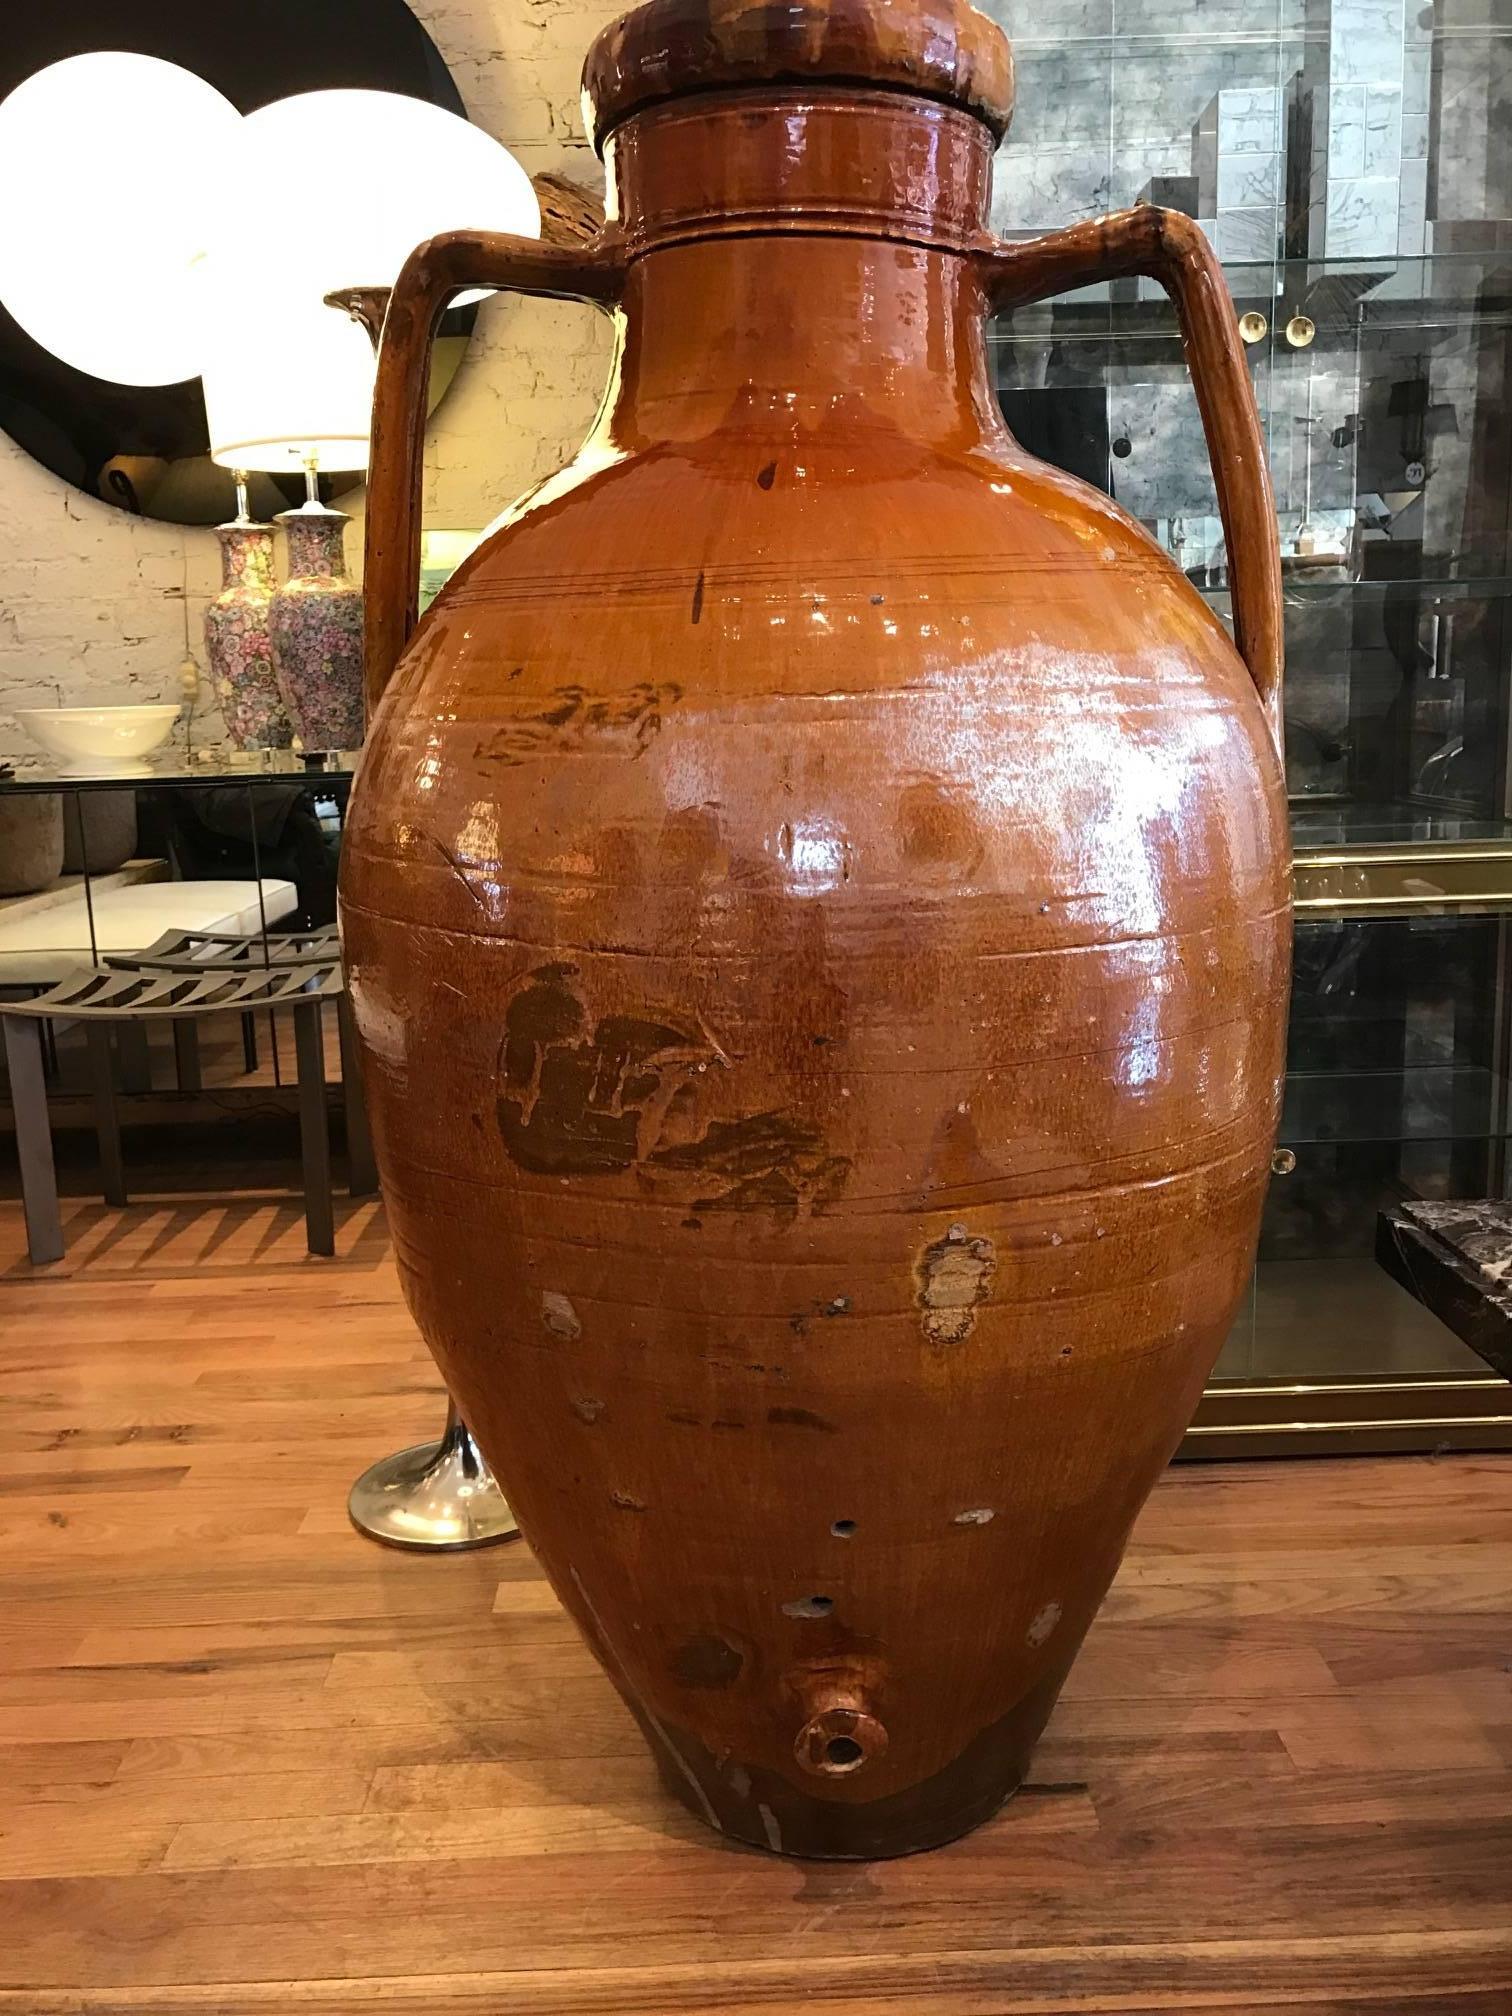 Large Italian Amphora form olive oil vessel. The 19th Century large vessel has a rich glazed terra cotta finish. There is a spout at the base.